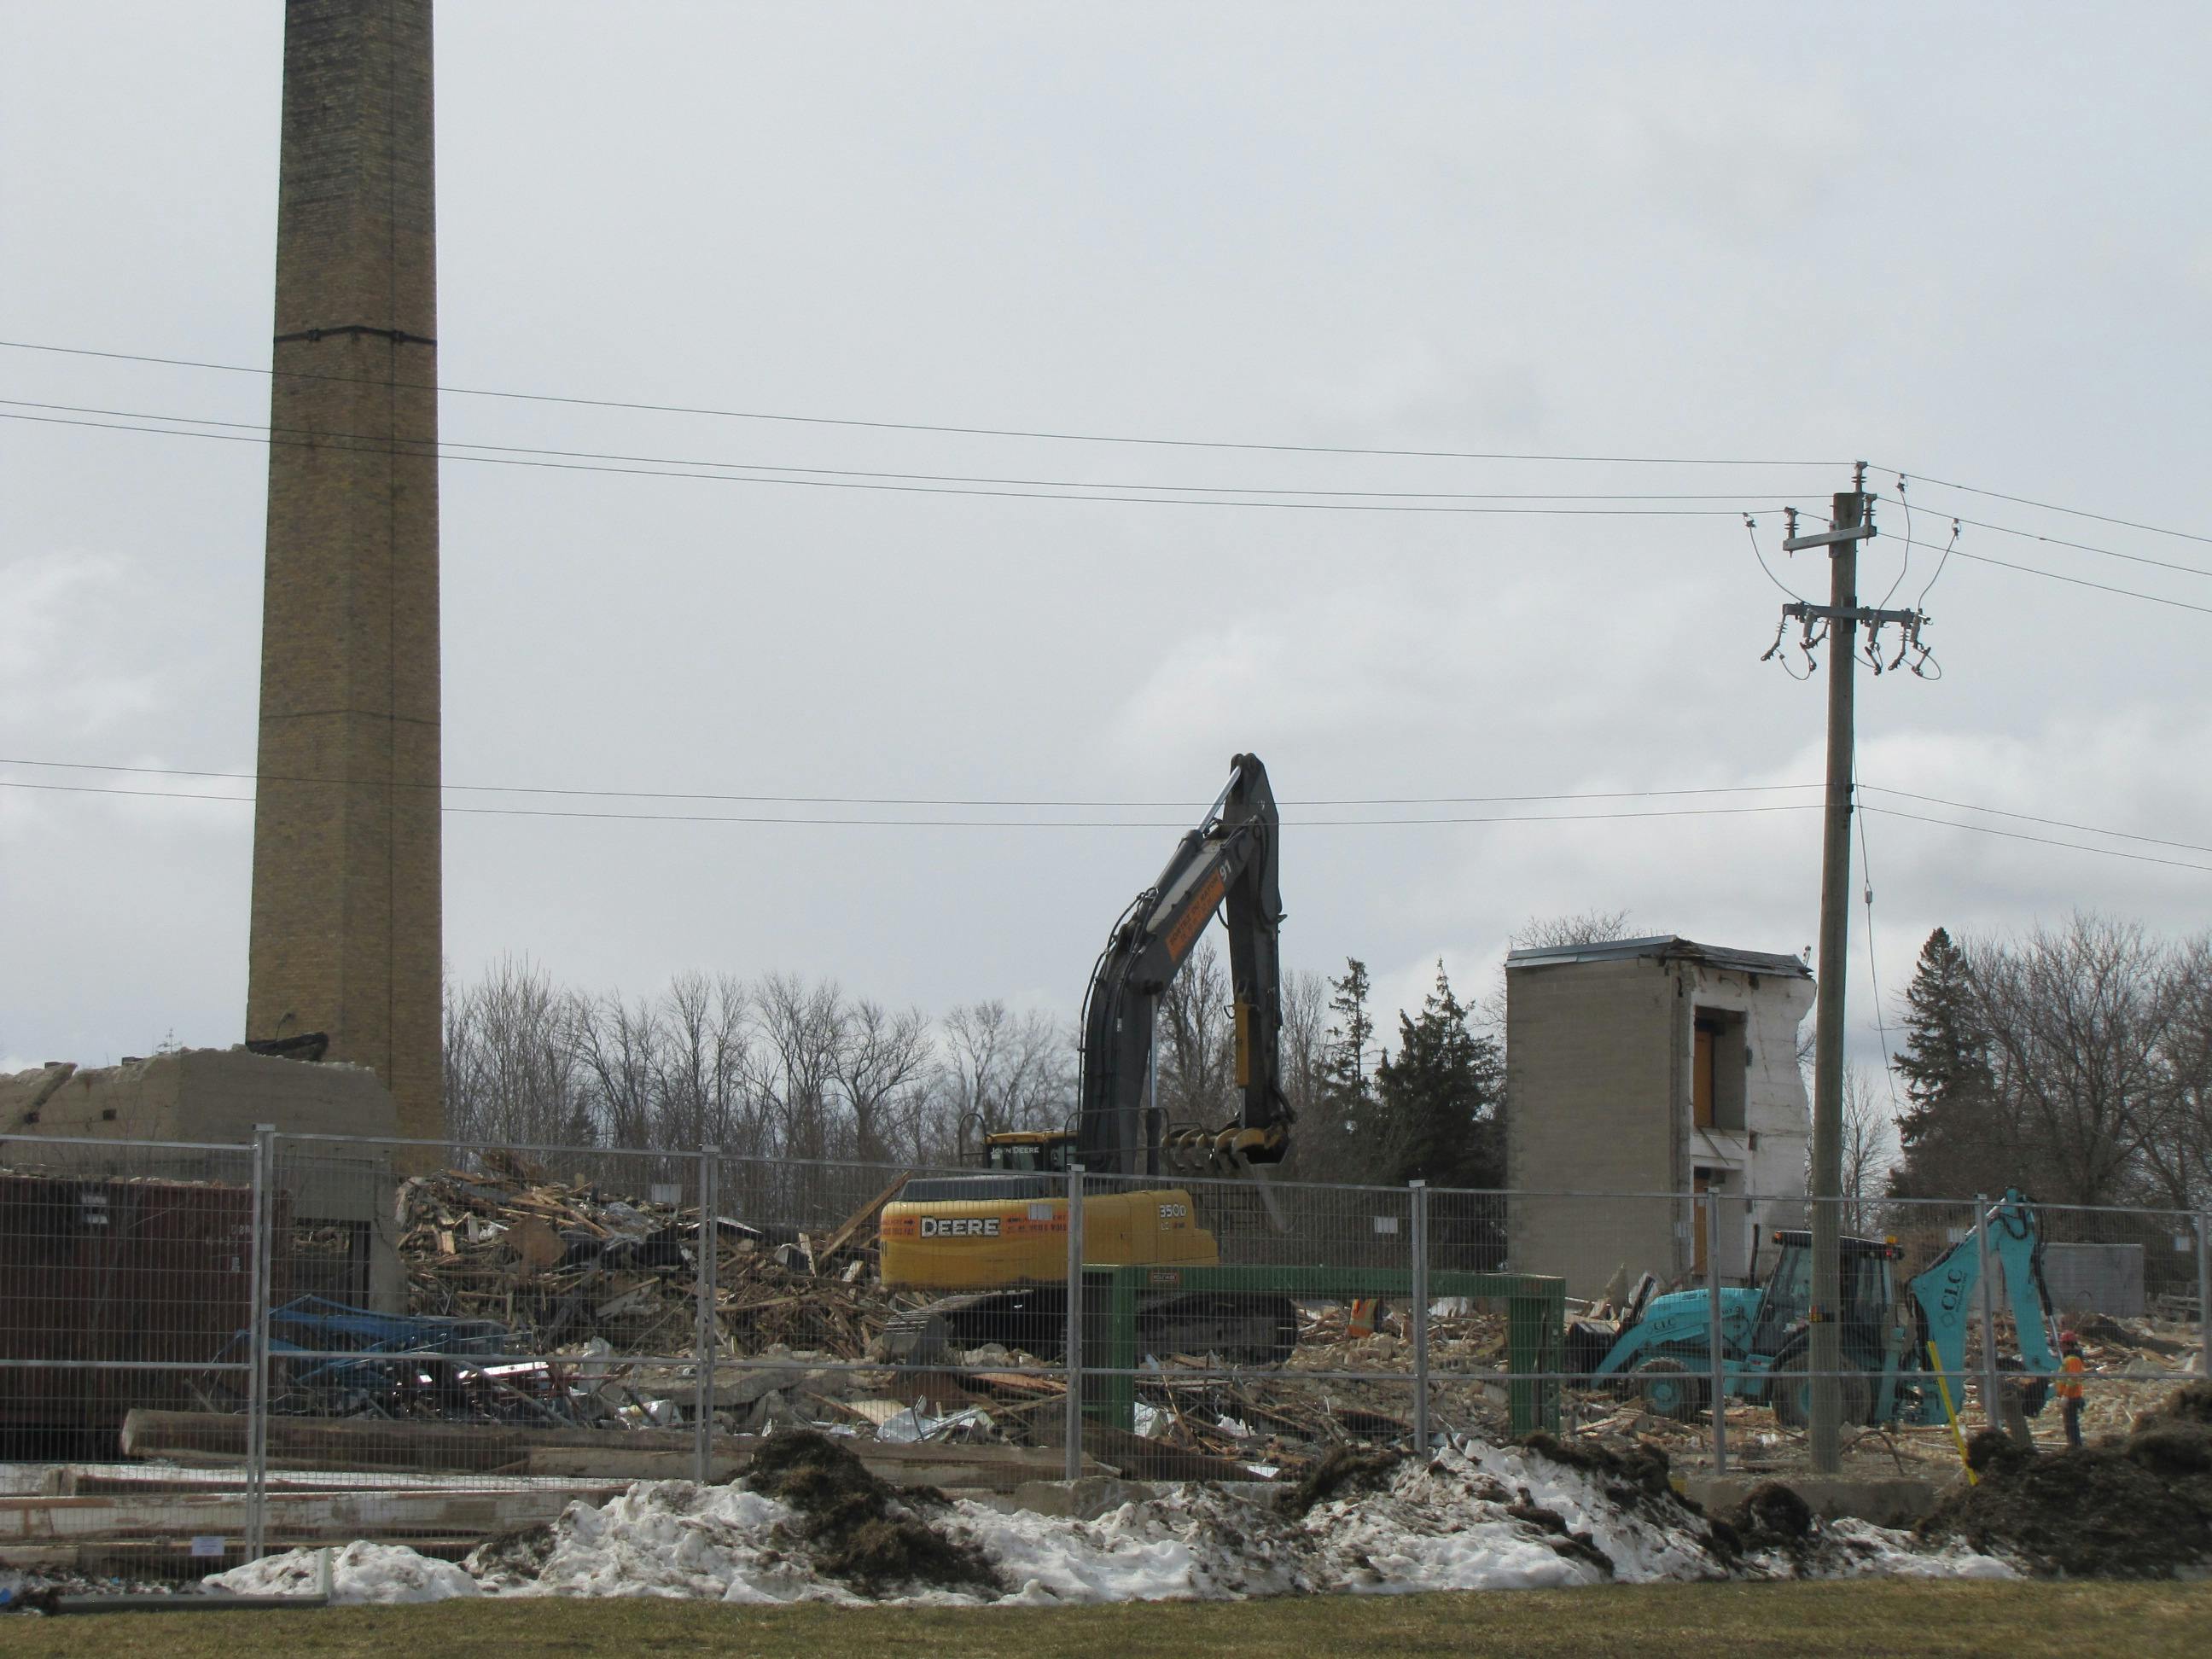 Demolition of Bogdon and Gross - March 18, 2021